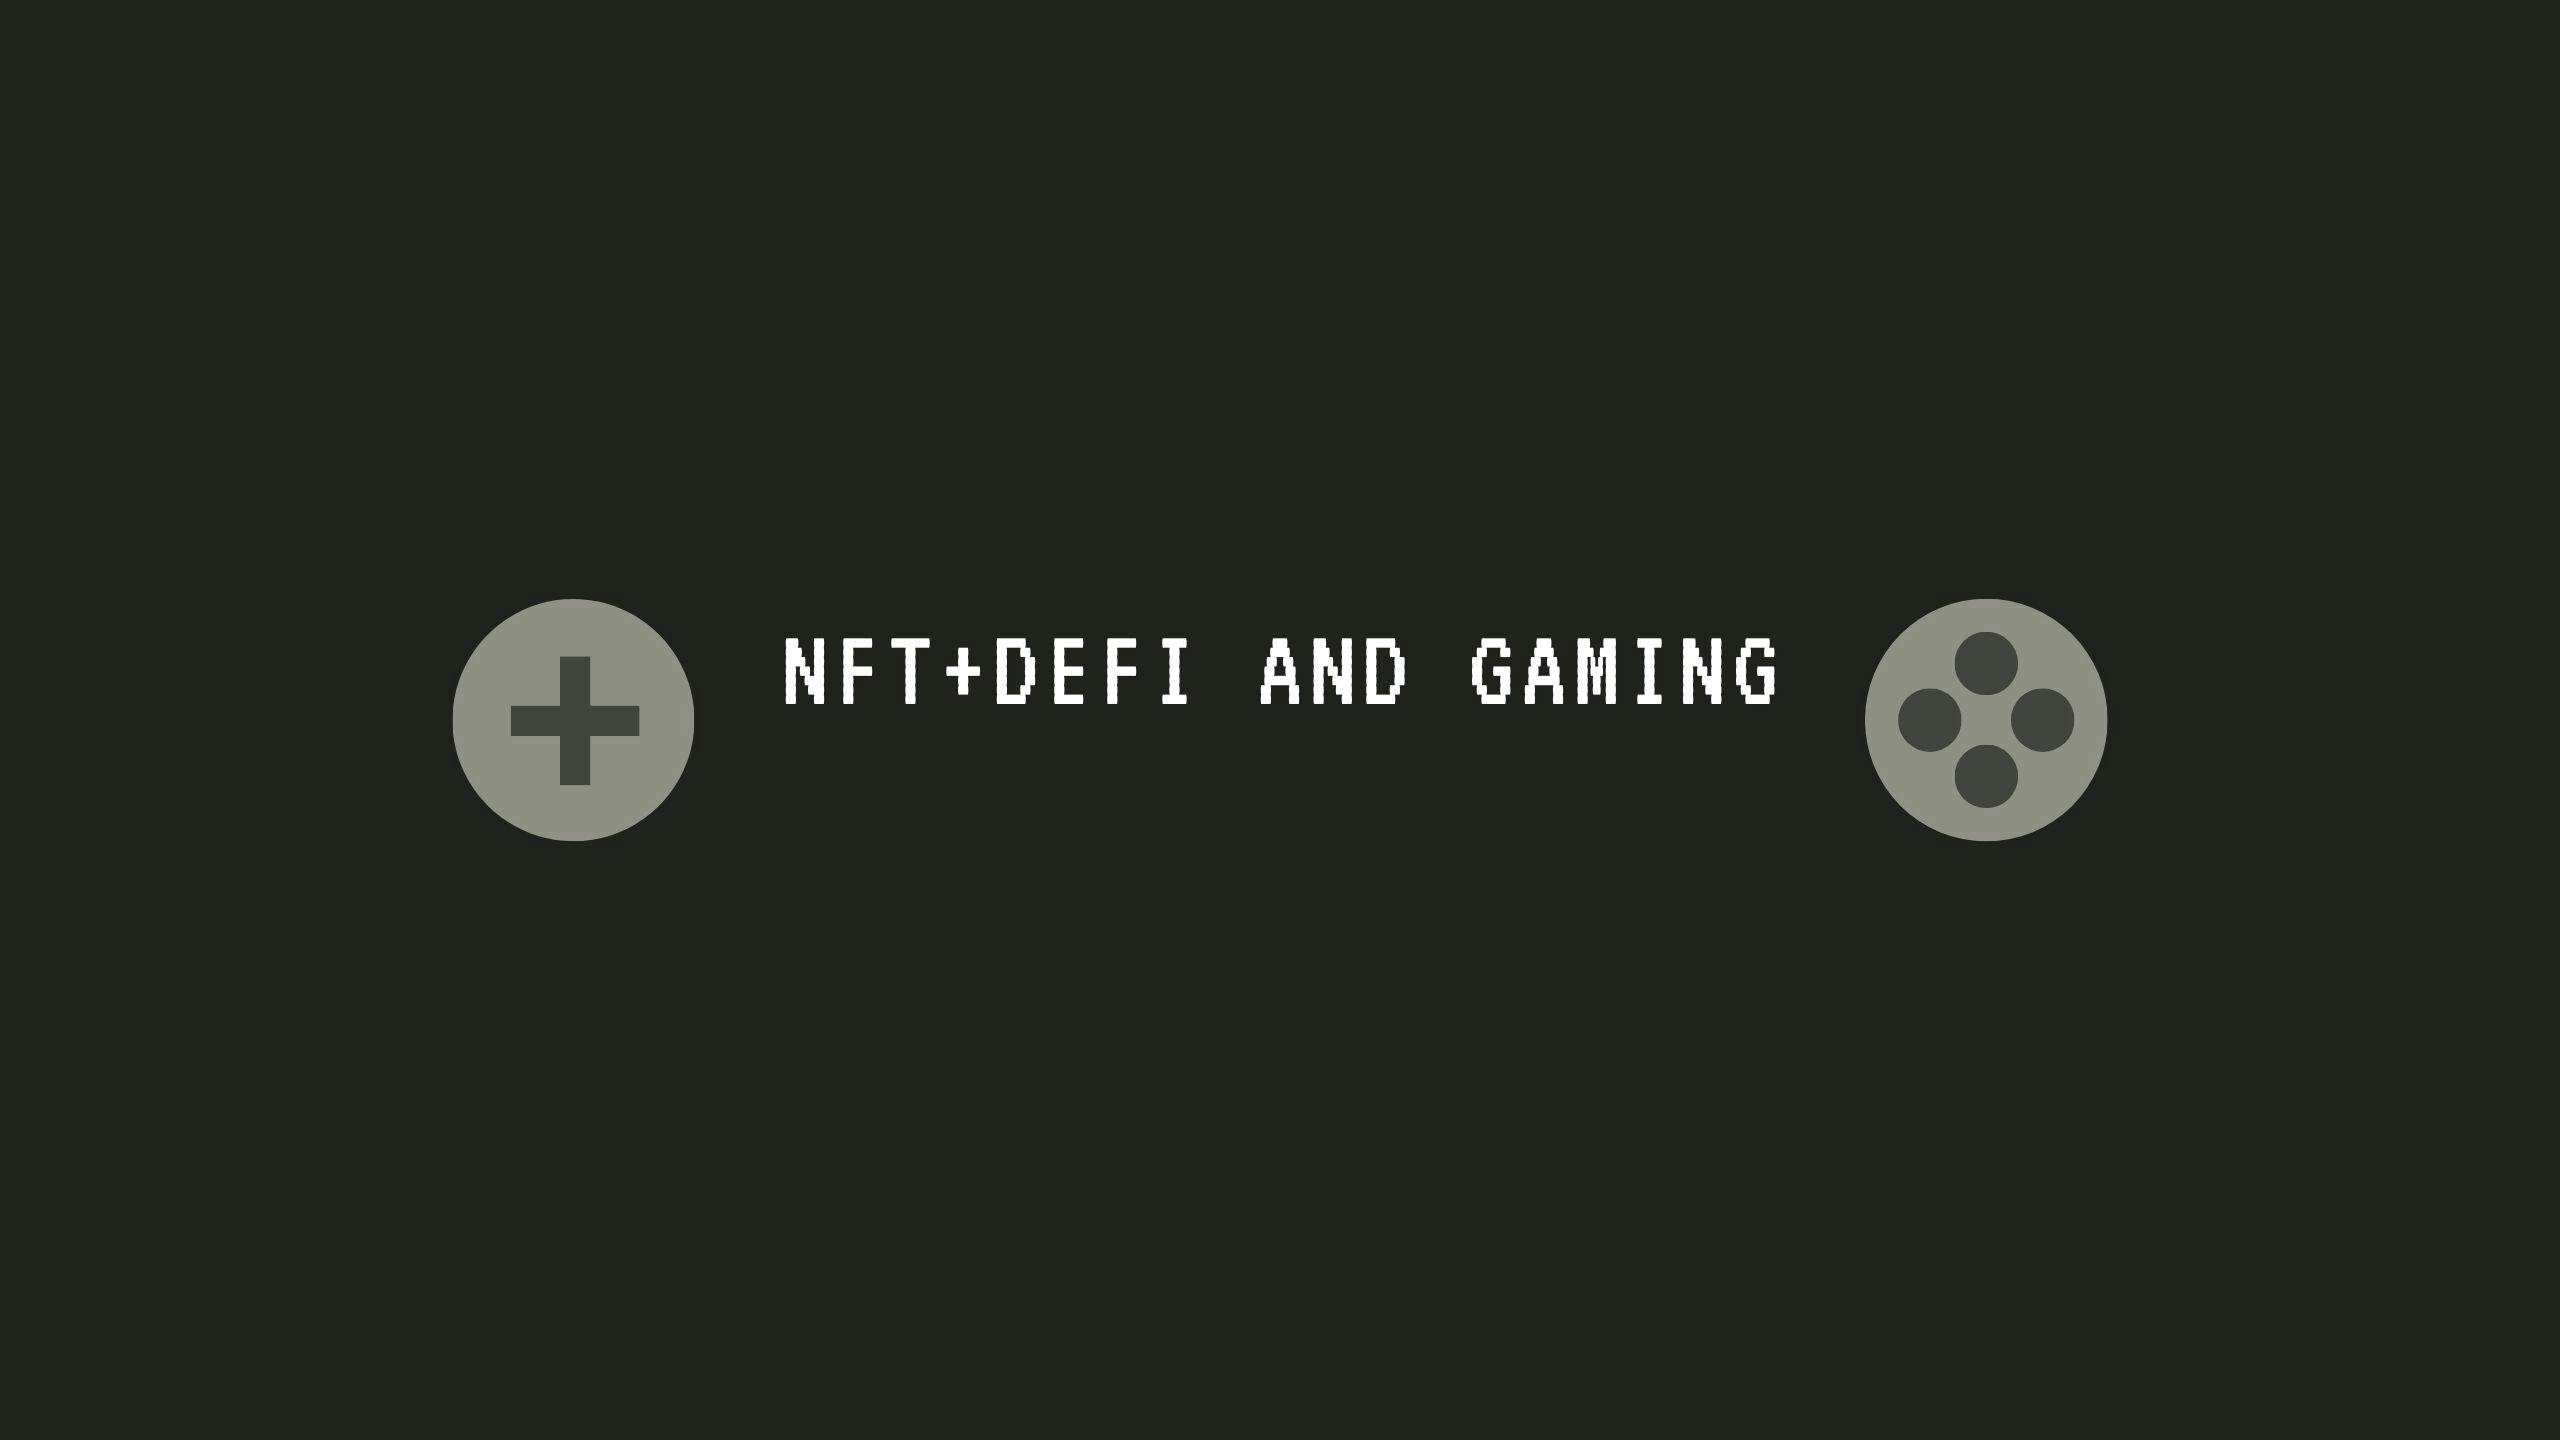 /everything-you-need-to-know-about-nfts-defi-and-gaming-rbm335n feature image